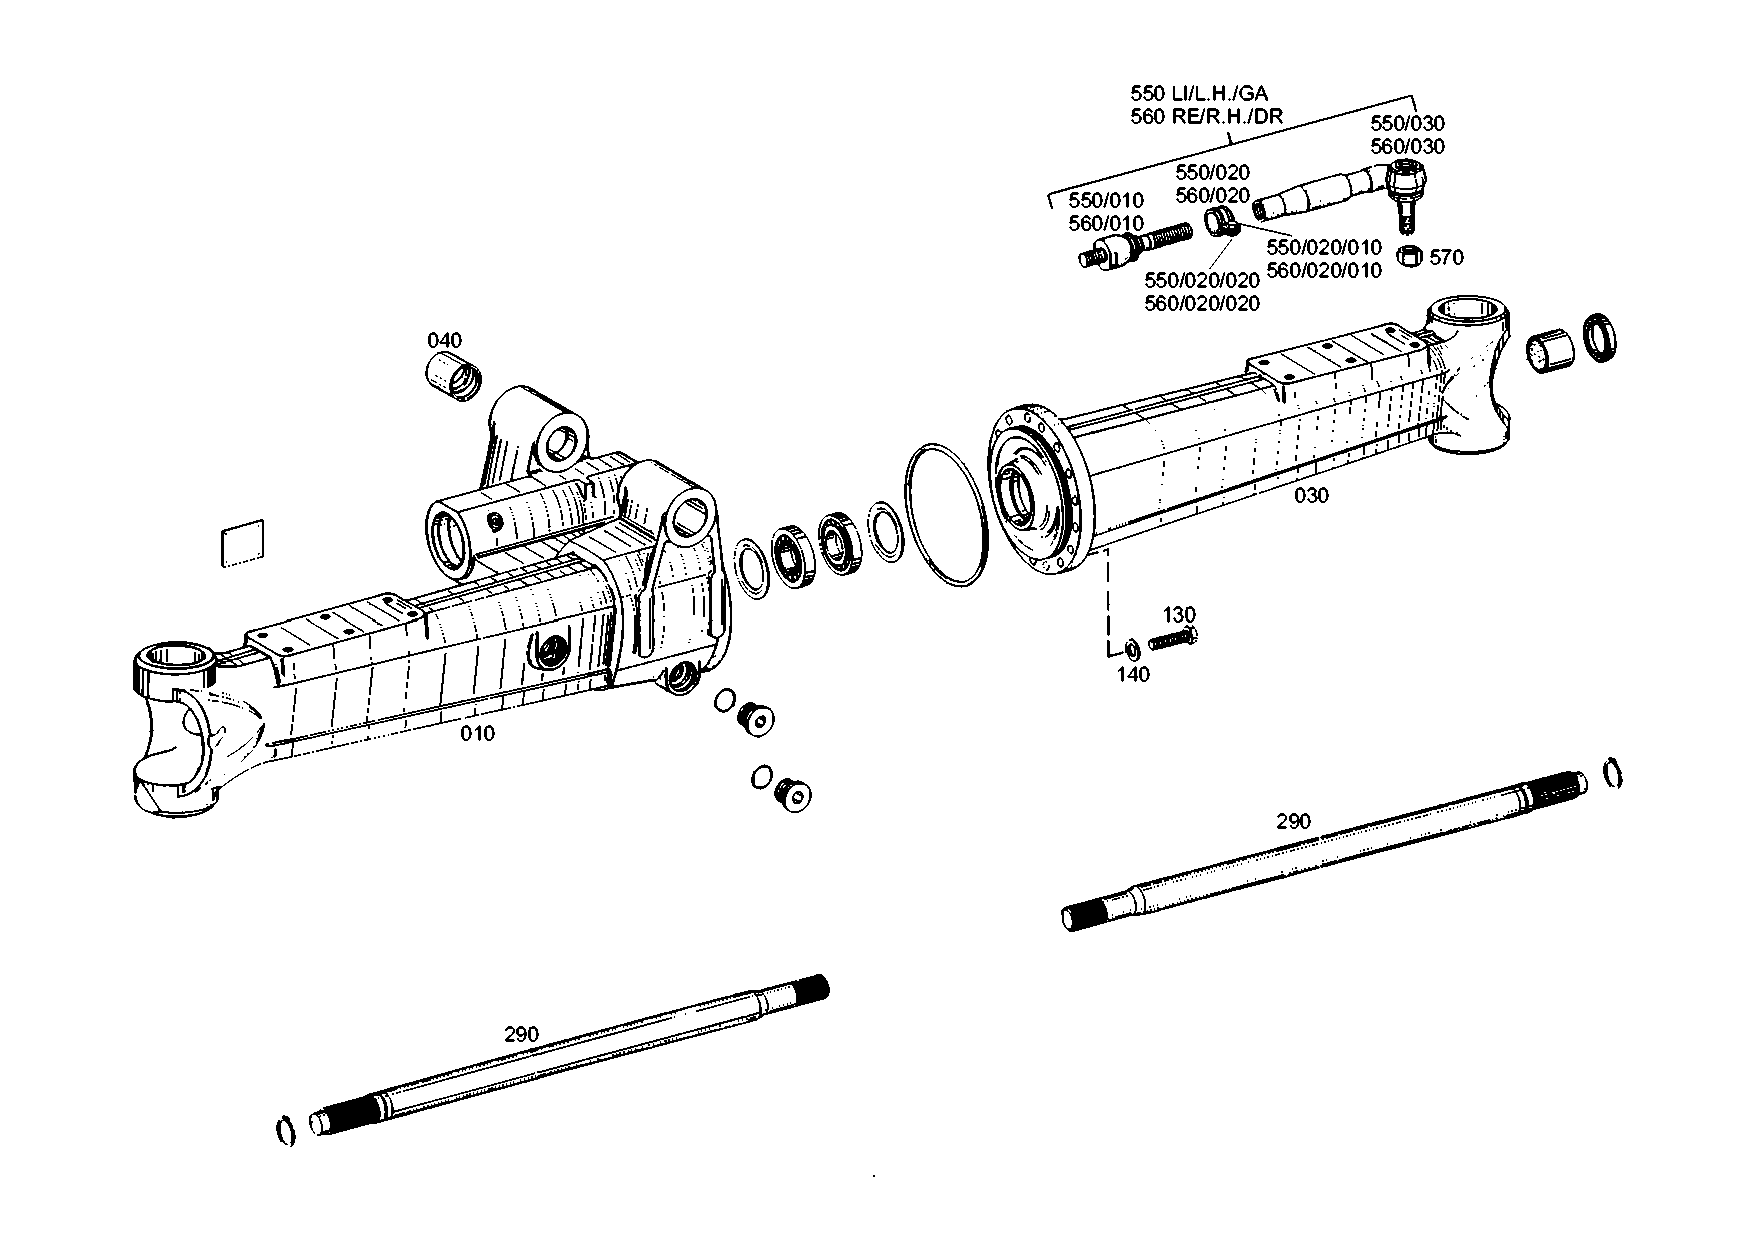 drawing for LIEBHERR GMBH 7027749 - TIE ROD (figure 4)